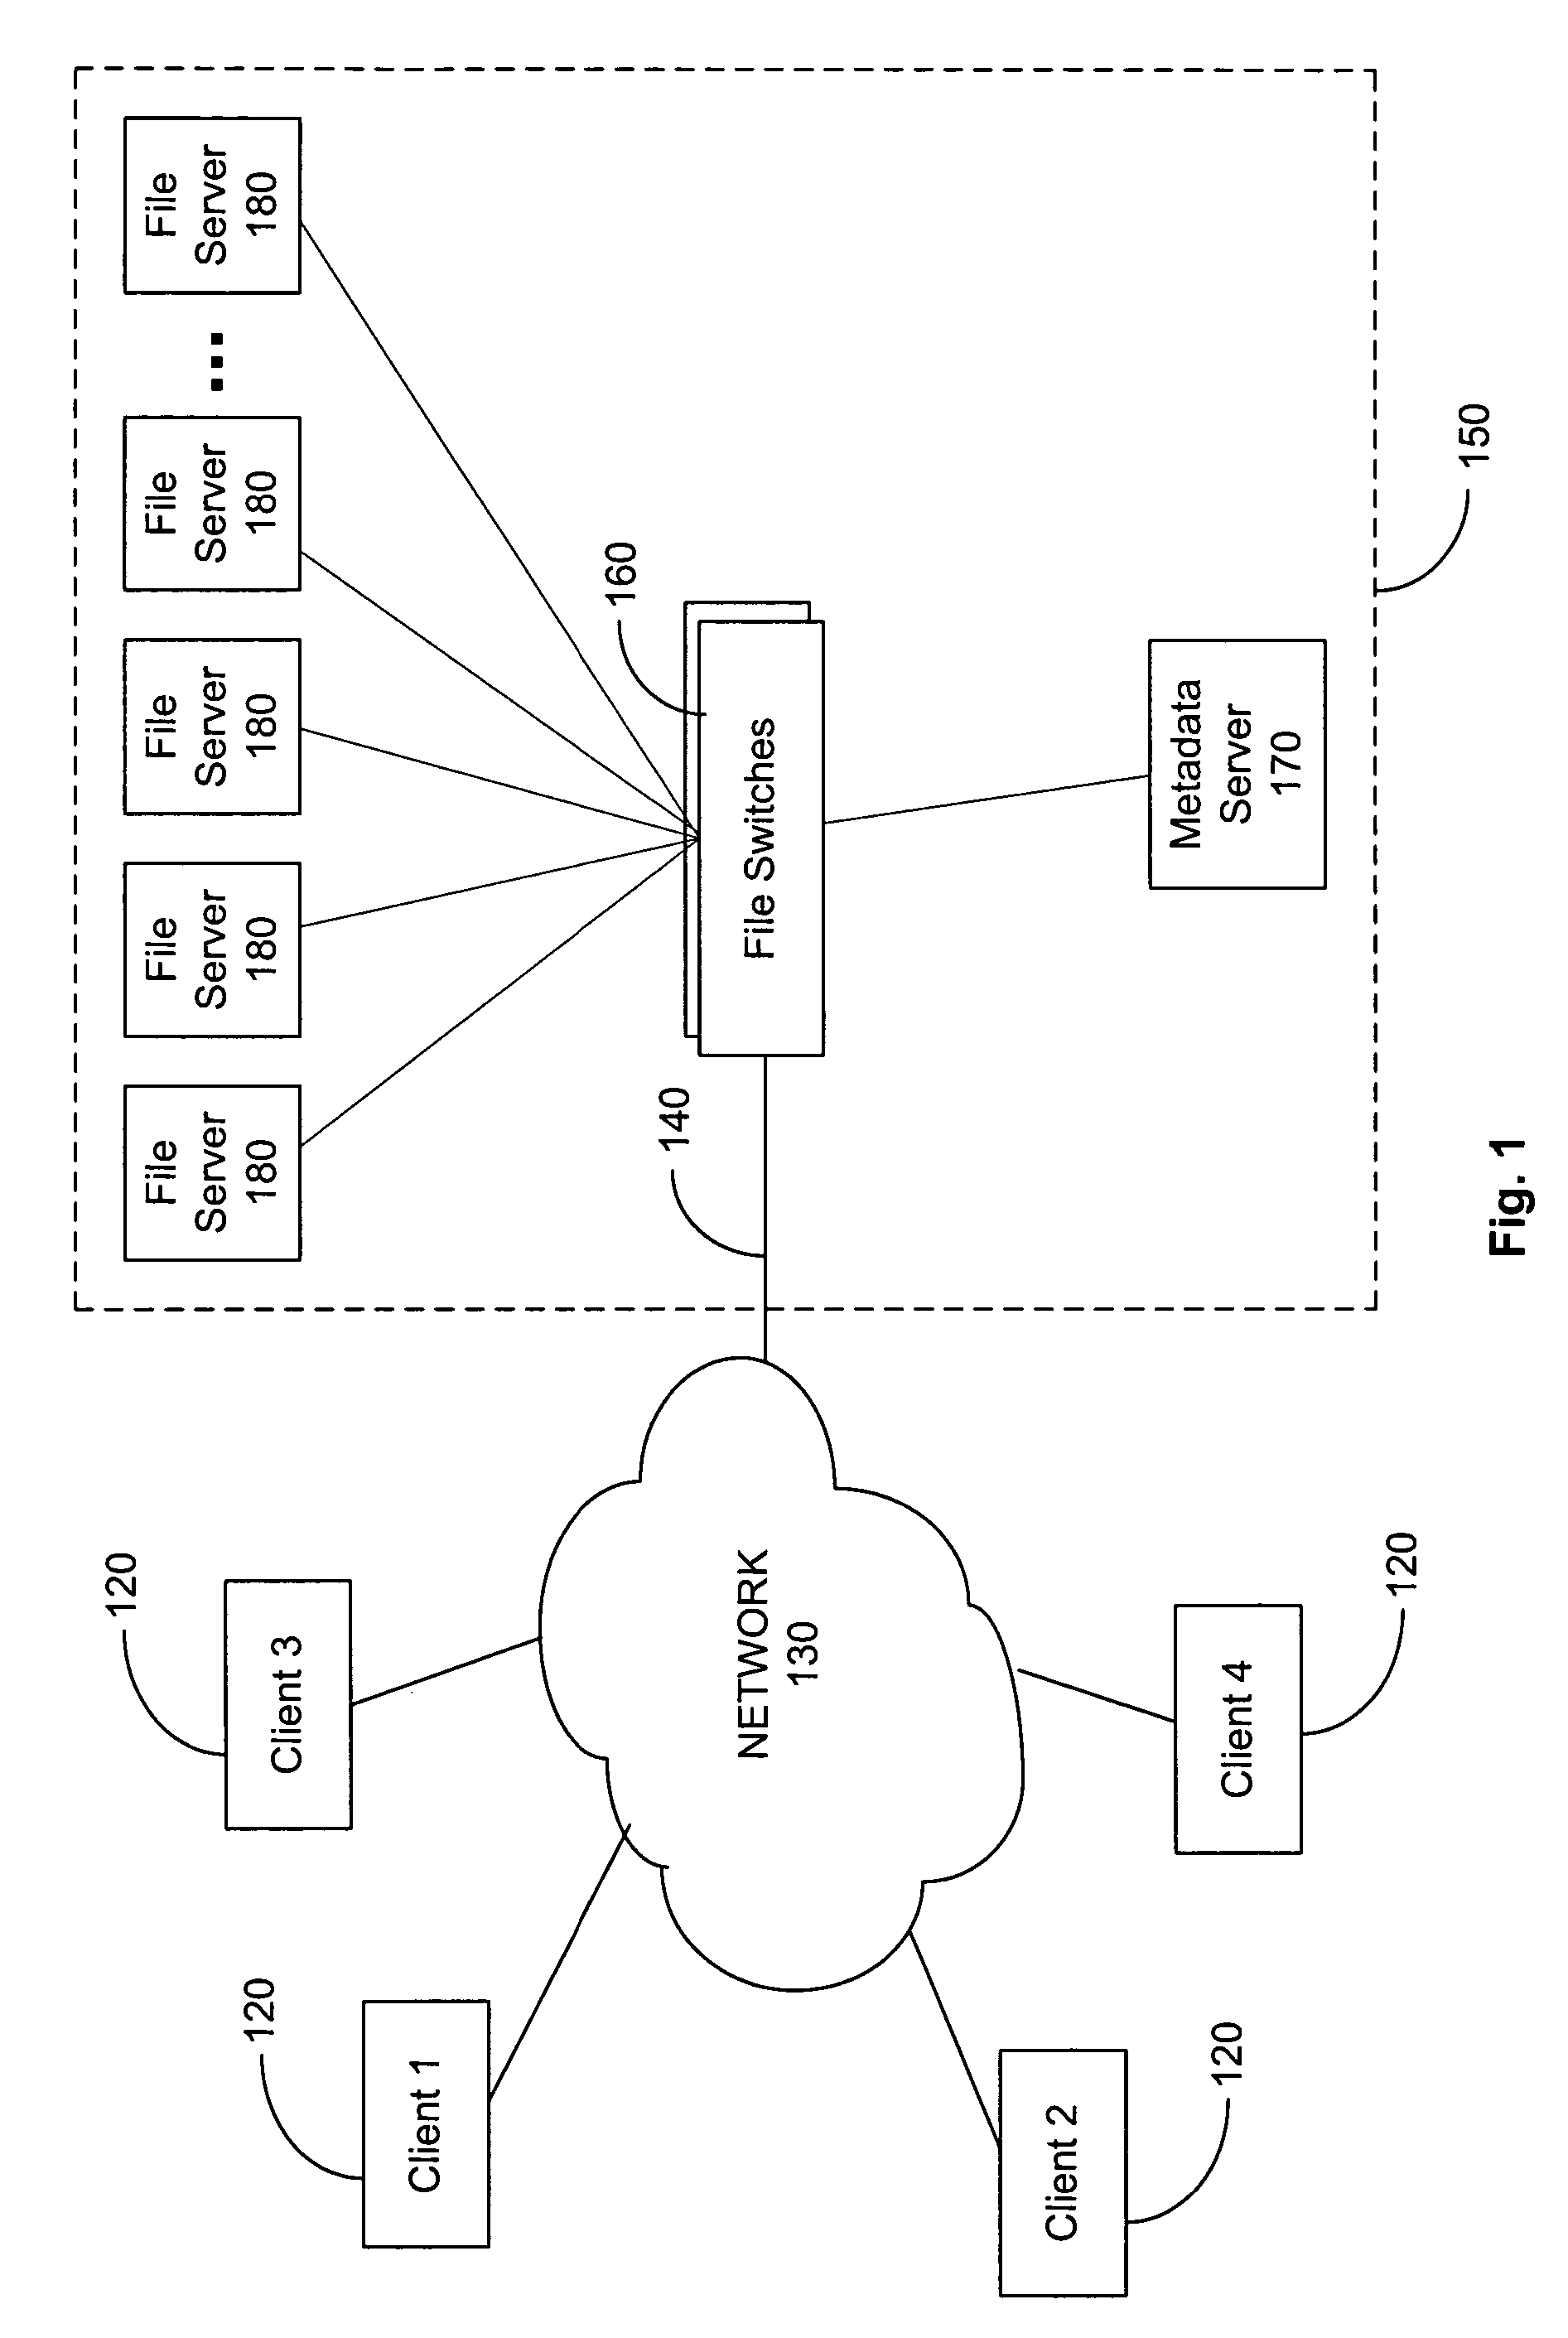 File-based hybrid file storage scheme supporting multiple file switches